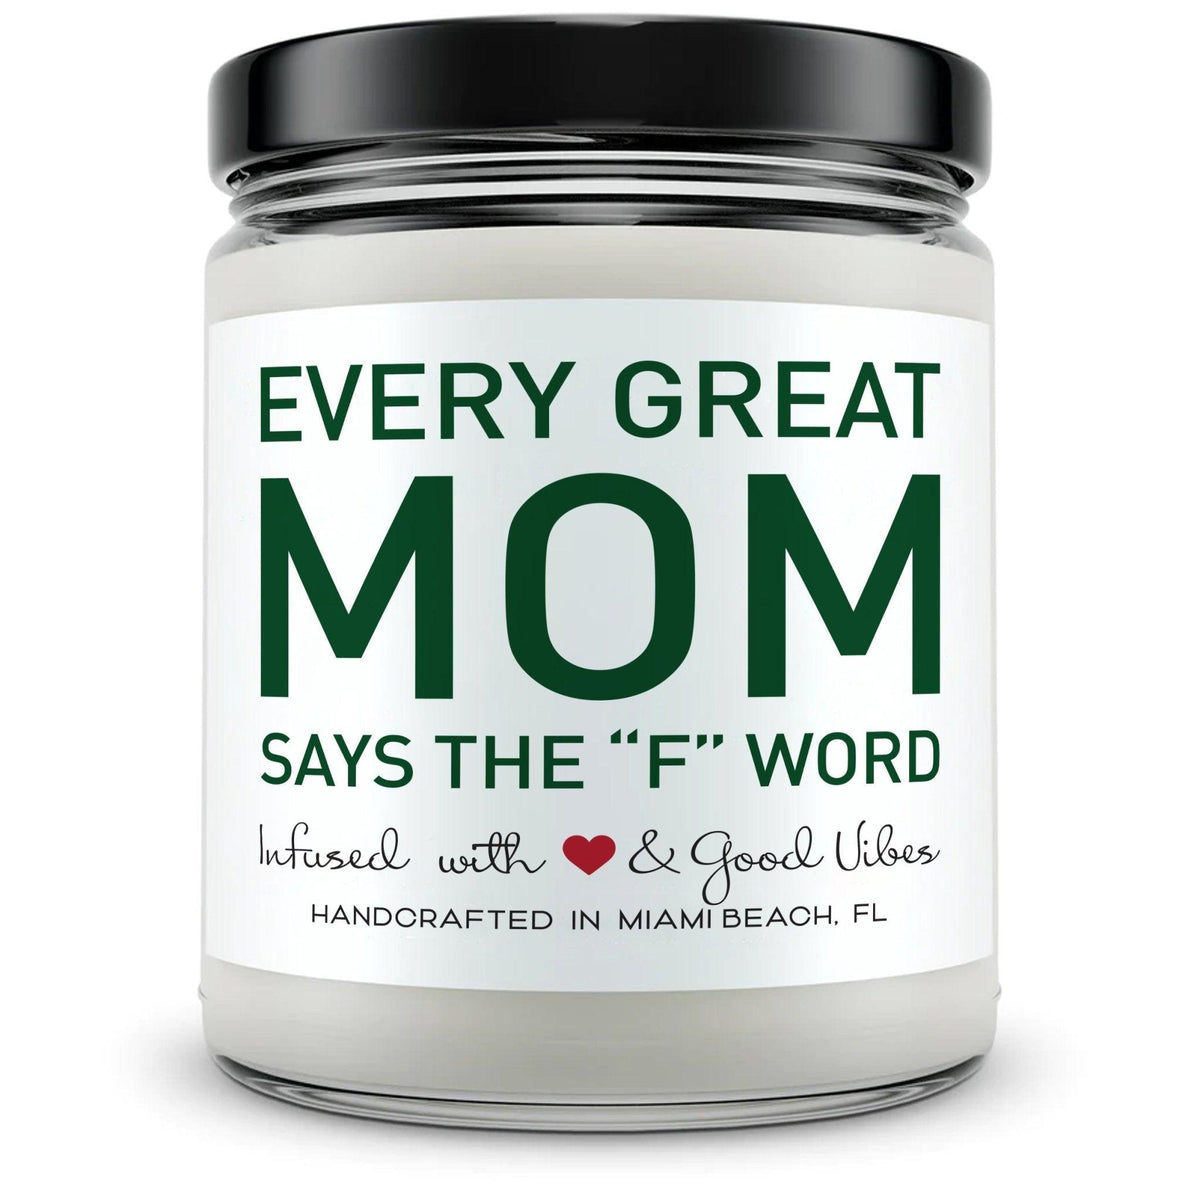 Every great Mom says the "F" word. - Mint Sugar Candle